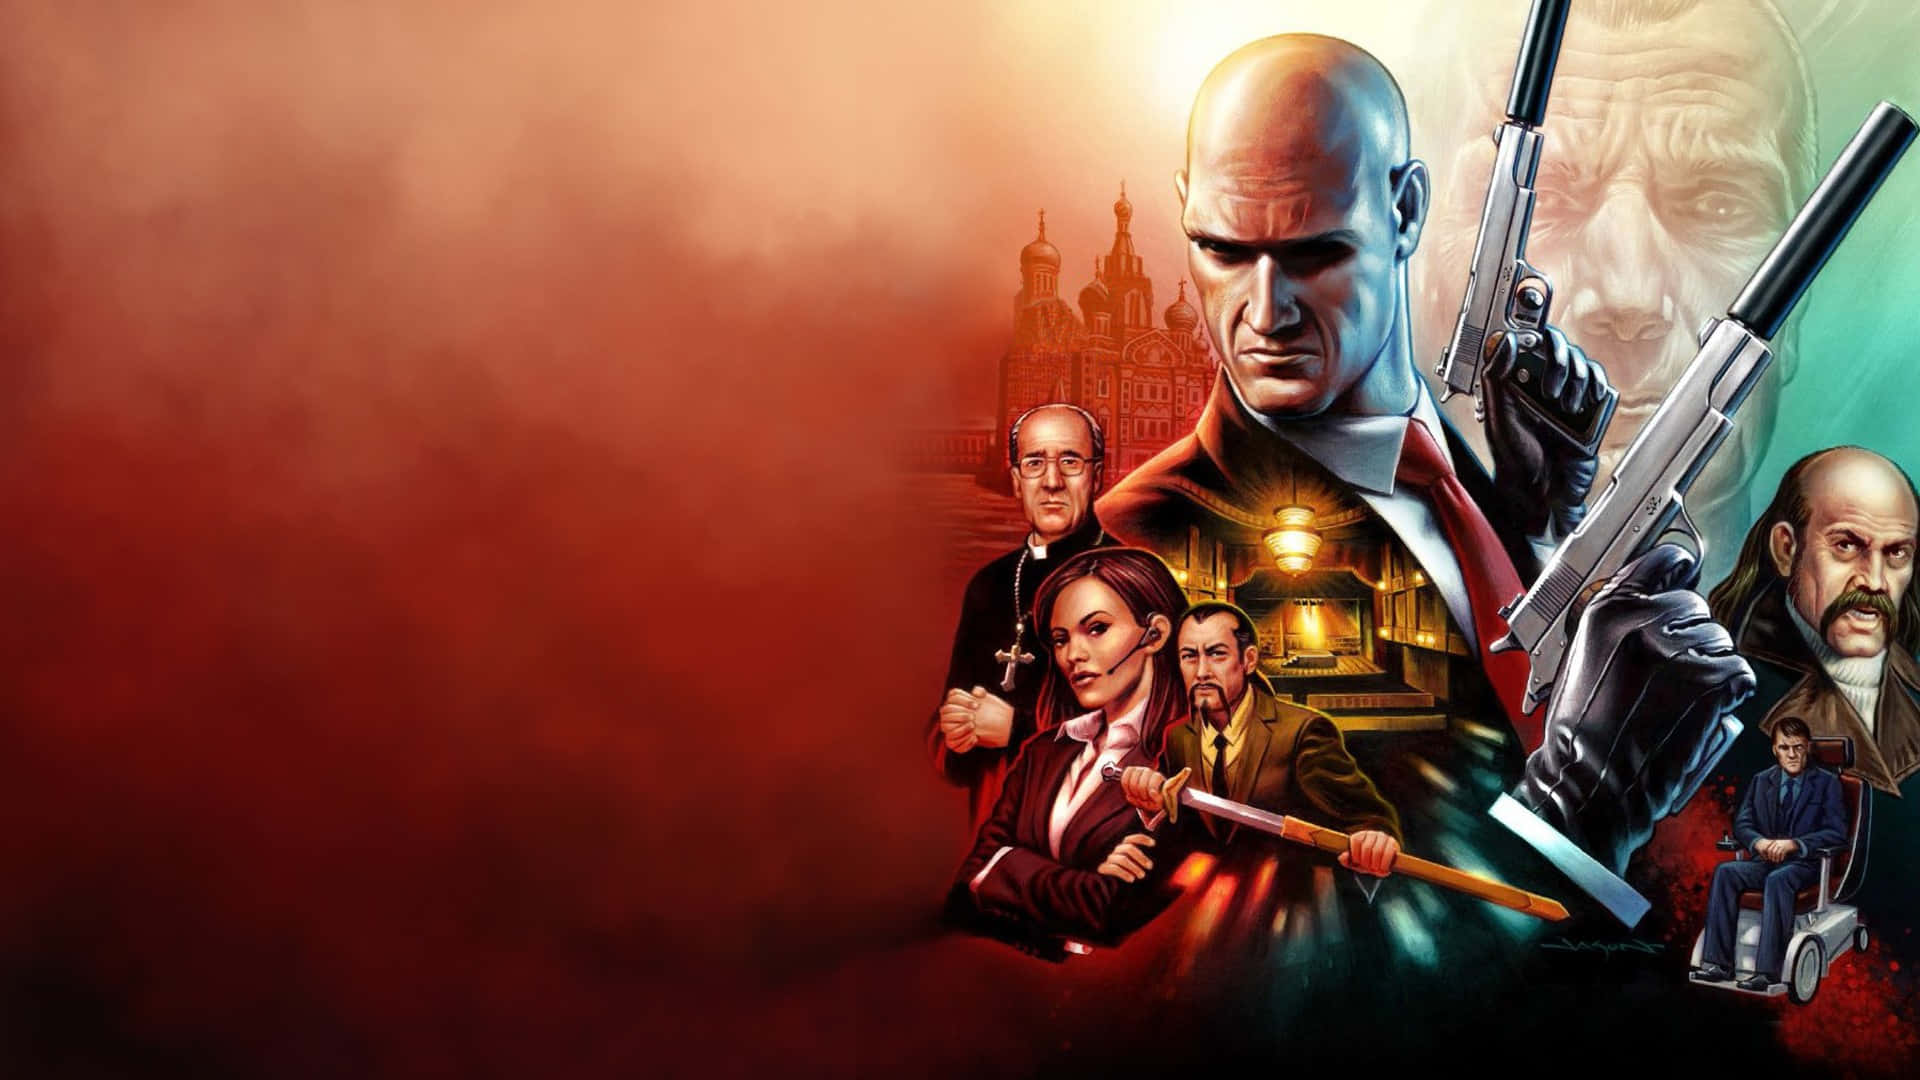 Immerse Yourself in the World of Hitman Wallpaper